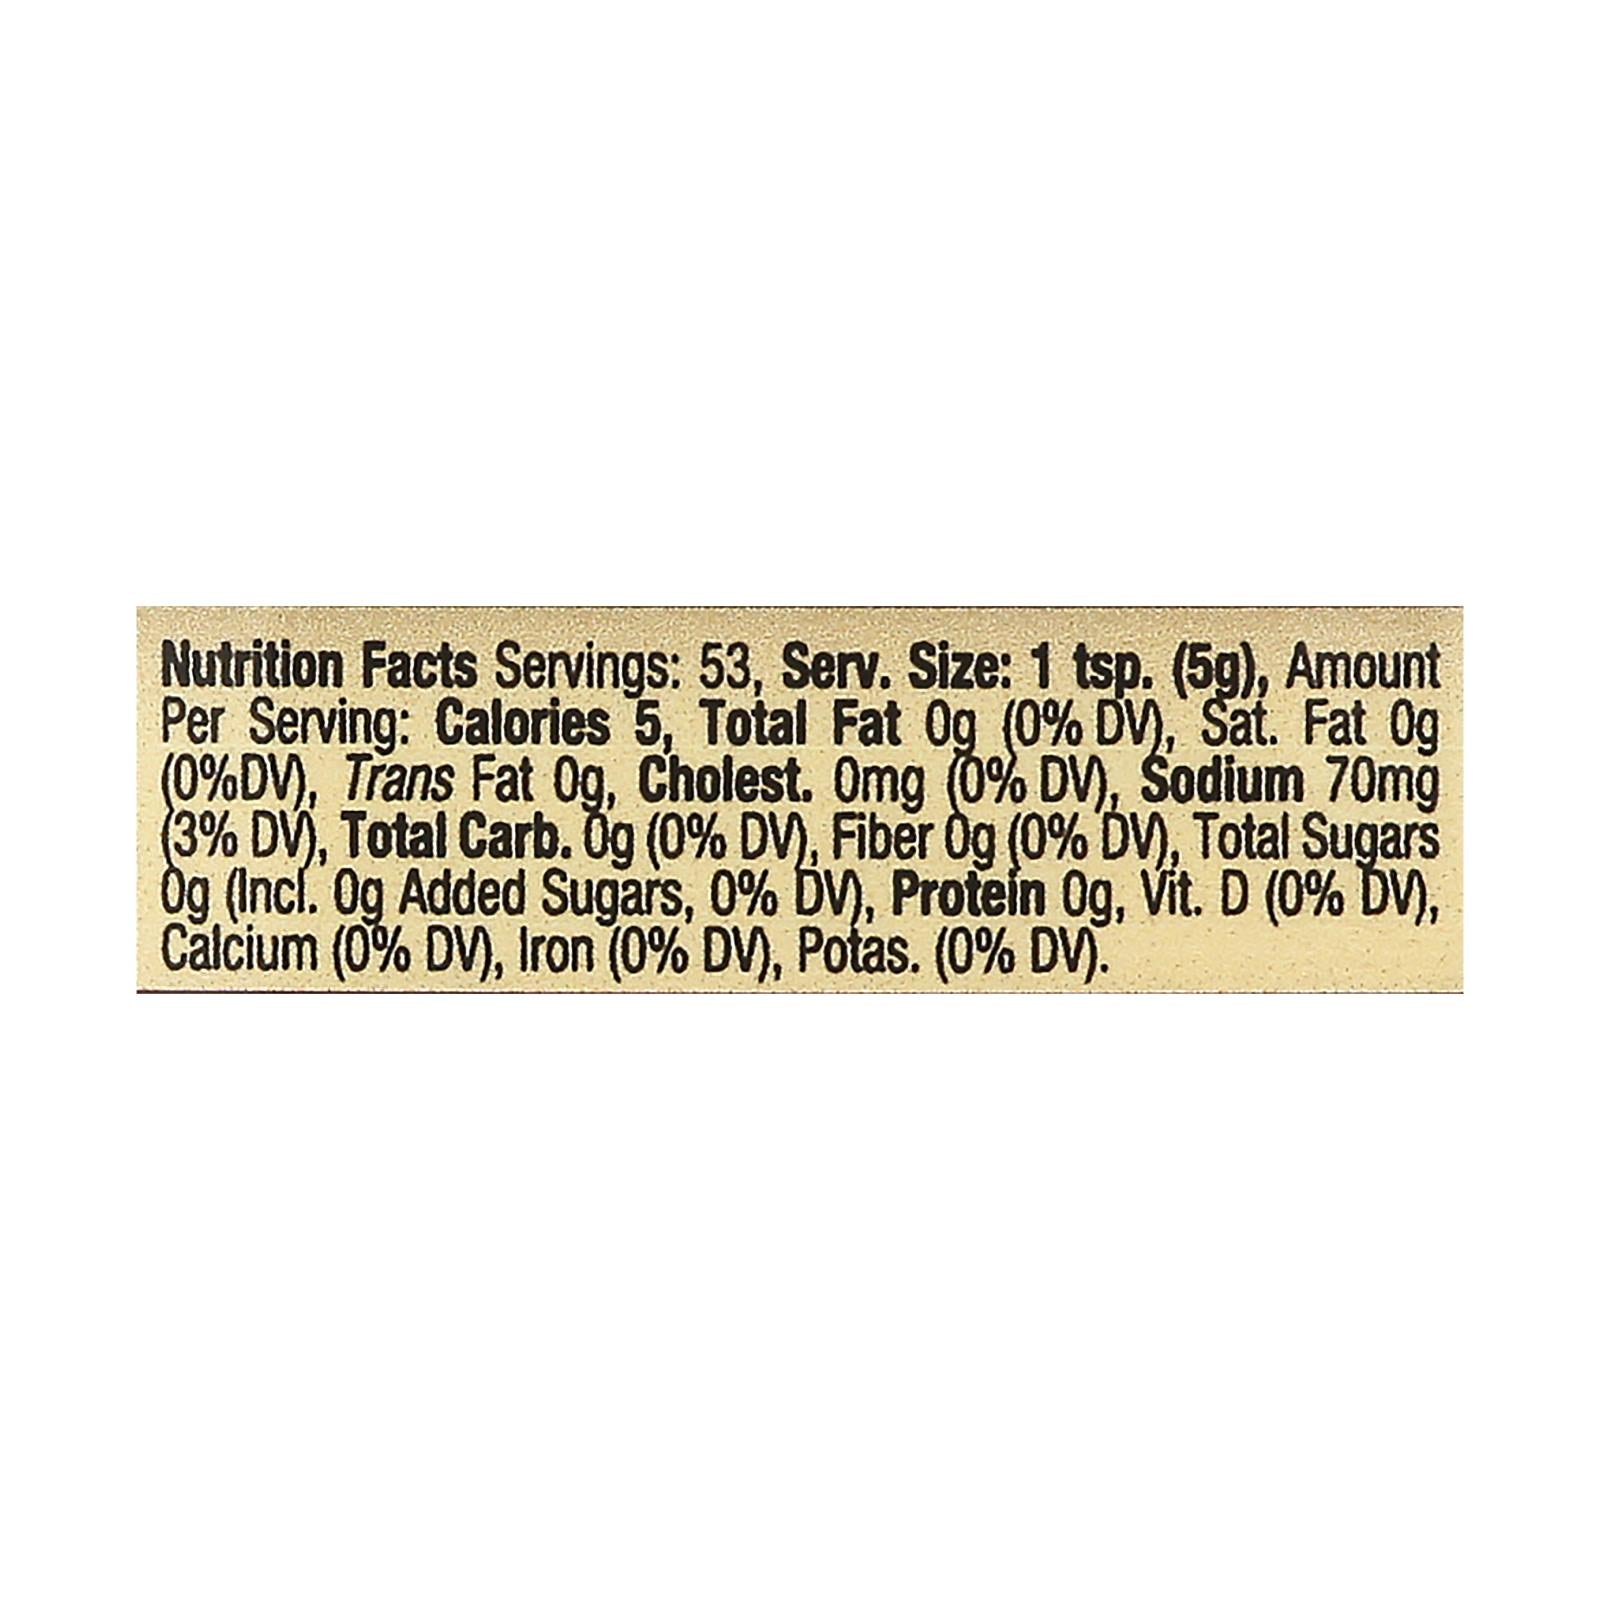 Silver Spring Mustard - Deli Style - Squeeze - Case of 9 - 9.5 oz